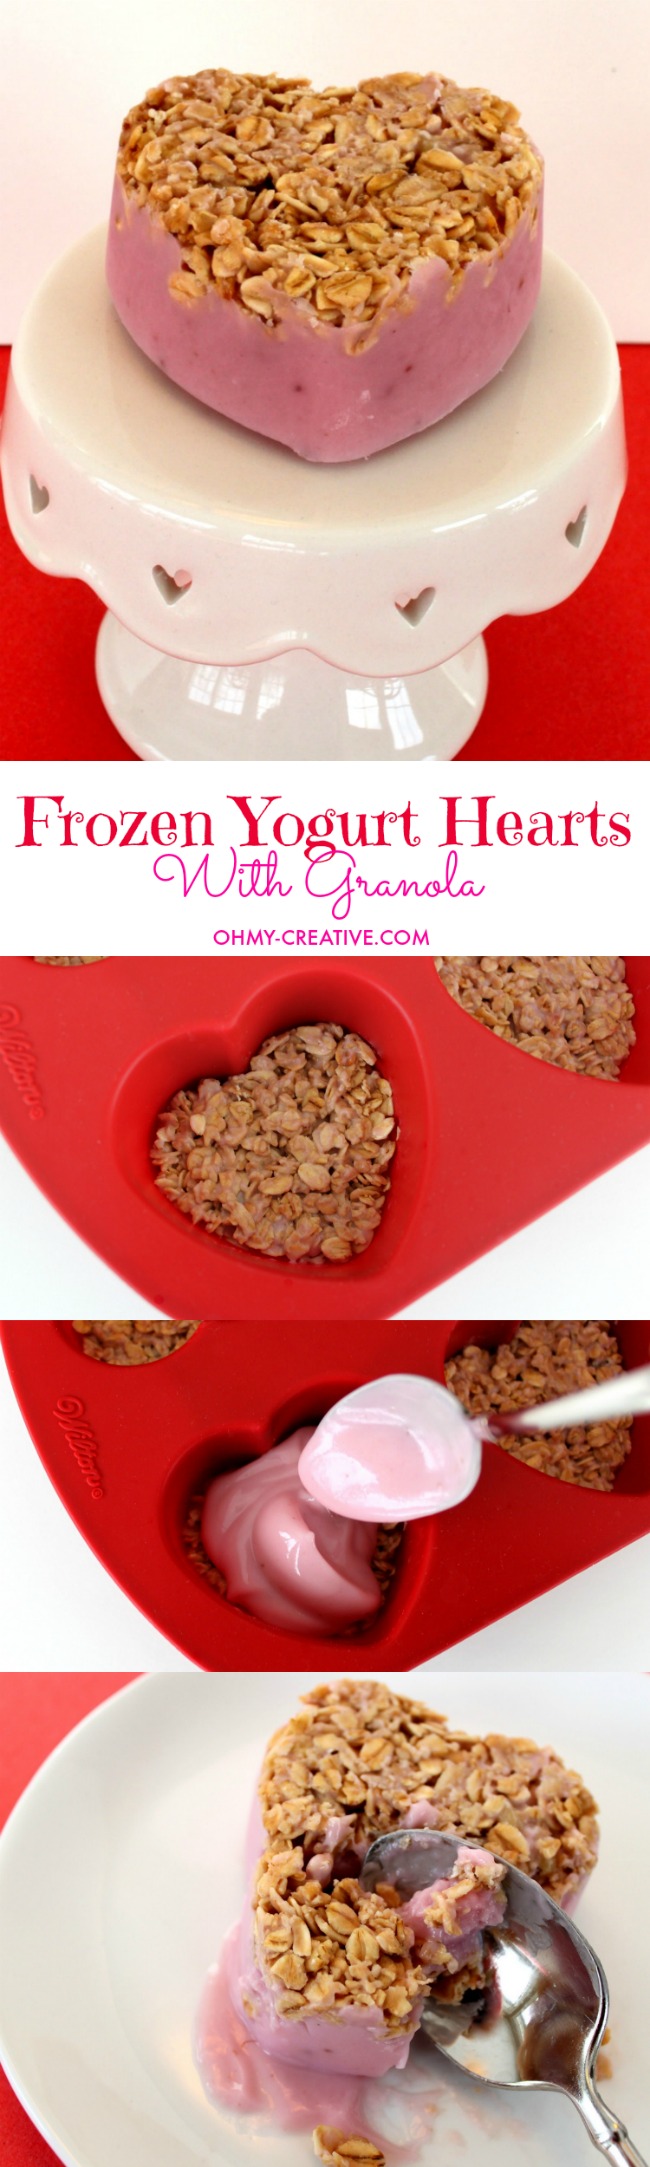 Make these Frozen Yogurt Hearts With Granola to warm the hearts of the ones you love | OHMY-CREATIVE.COM 